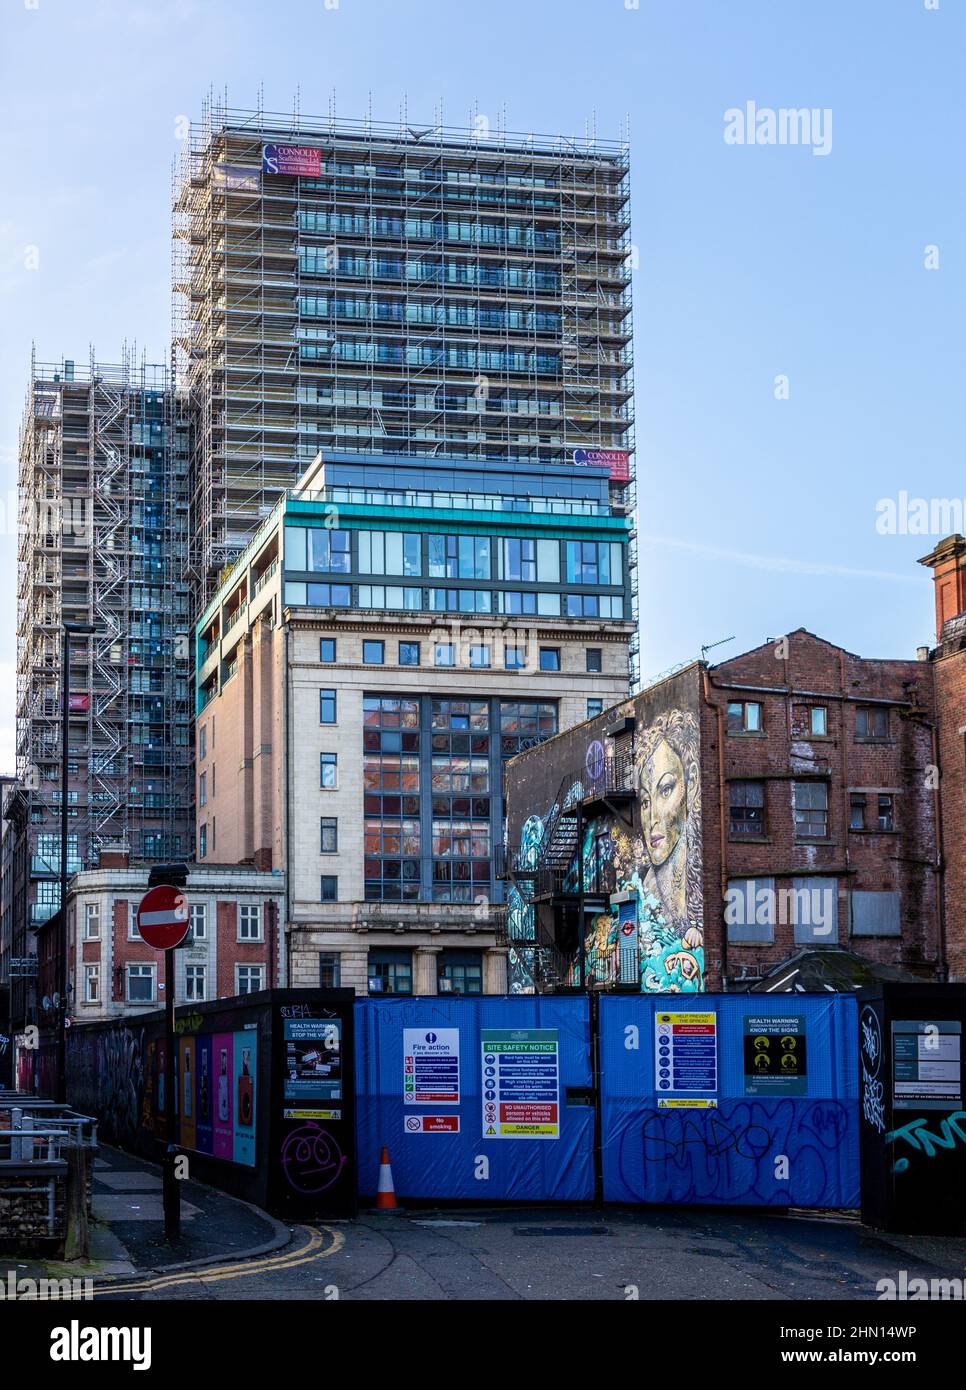 Tower building with scaffolding during refurbishment as seen from Northern Quarter, Manchester, England, UK Stock Photo